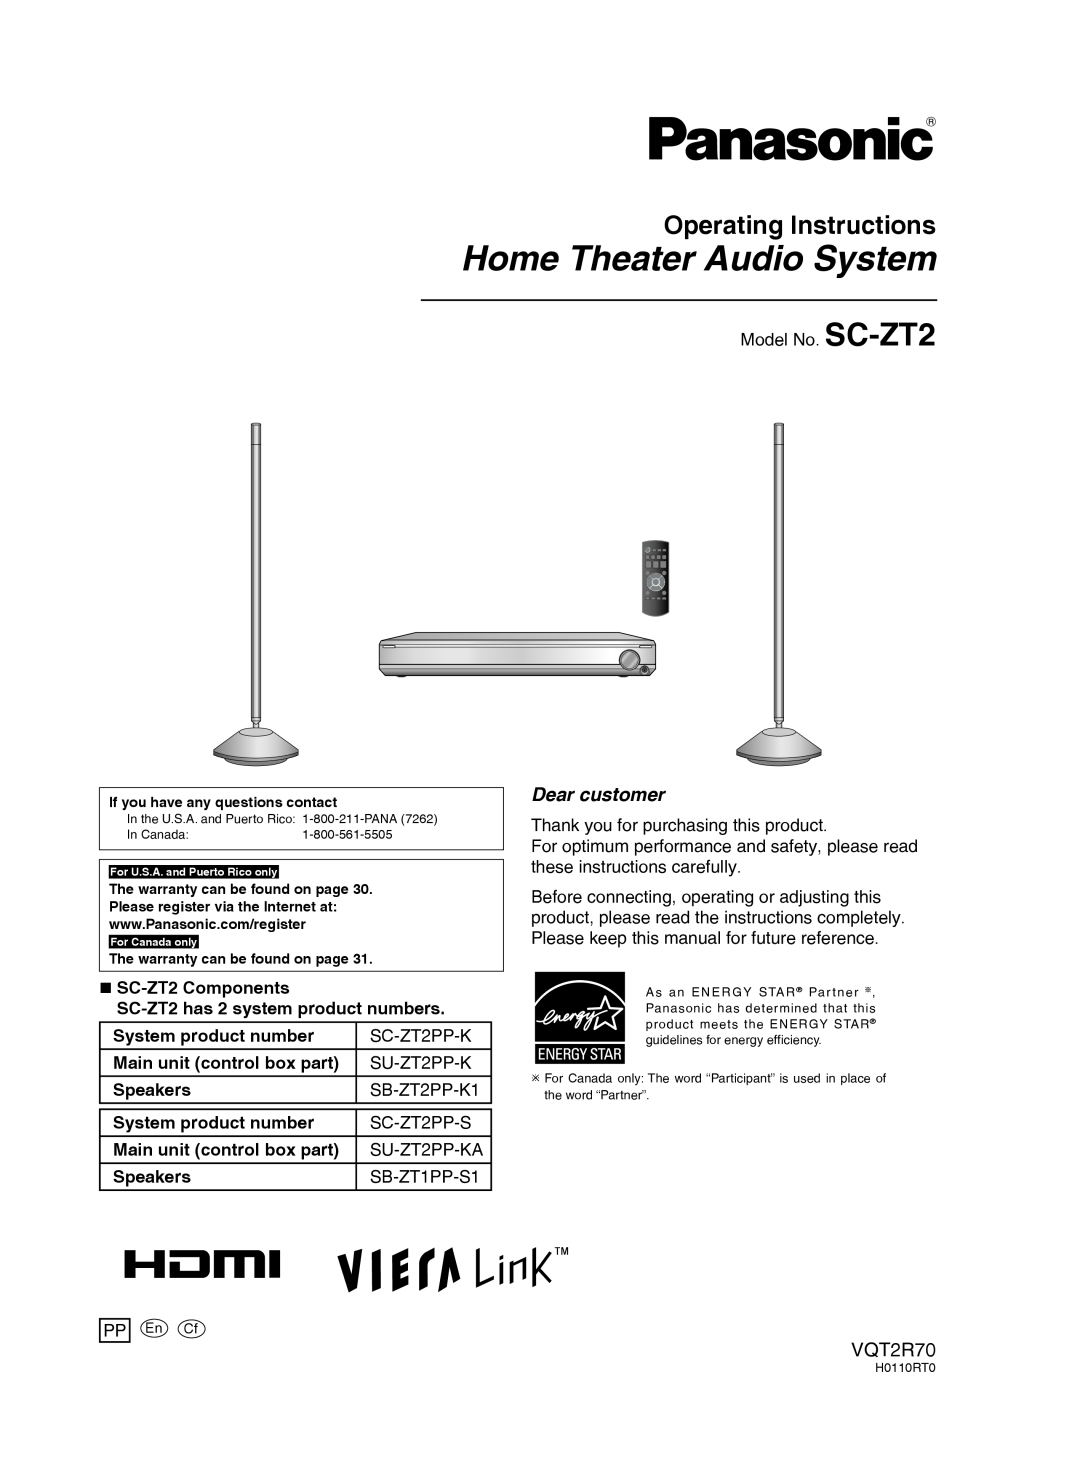 Panasonic warranty Operating Instructions, VQT2R70, Home Theater Audio System, „SC-ZT2Components, System product number 